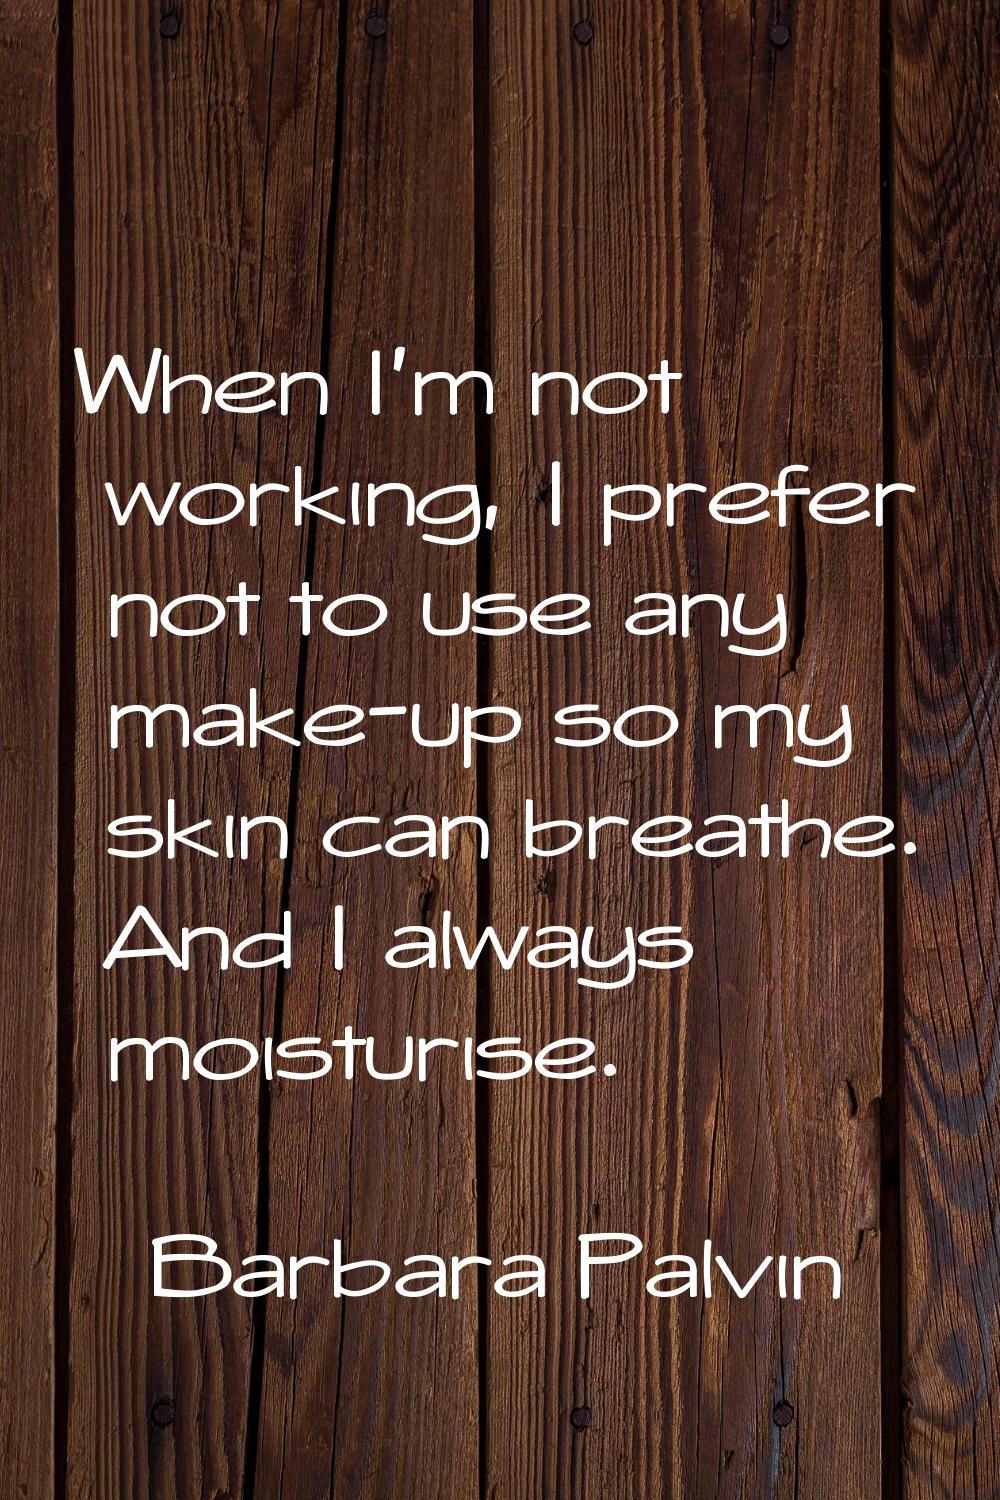 When I'm not working, I prefer not to use any make-up so my skin can breathe. And I always moisturi